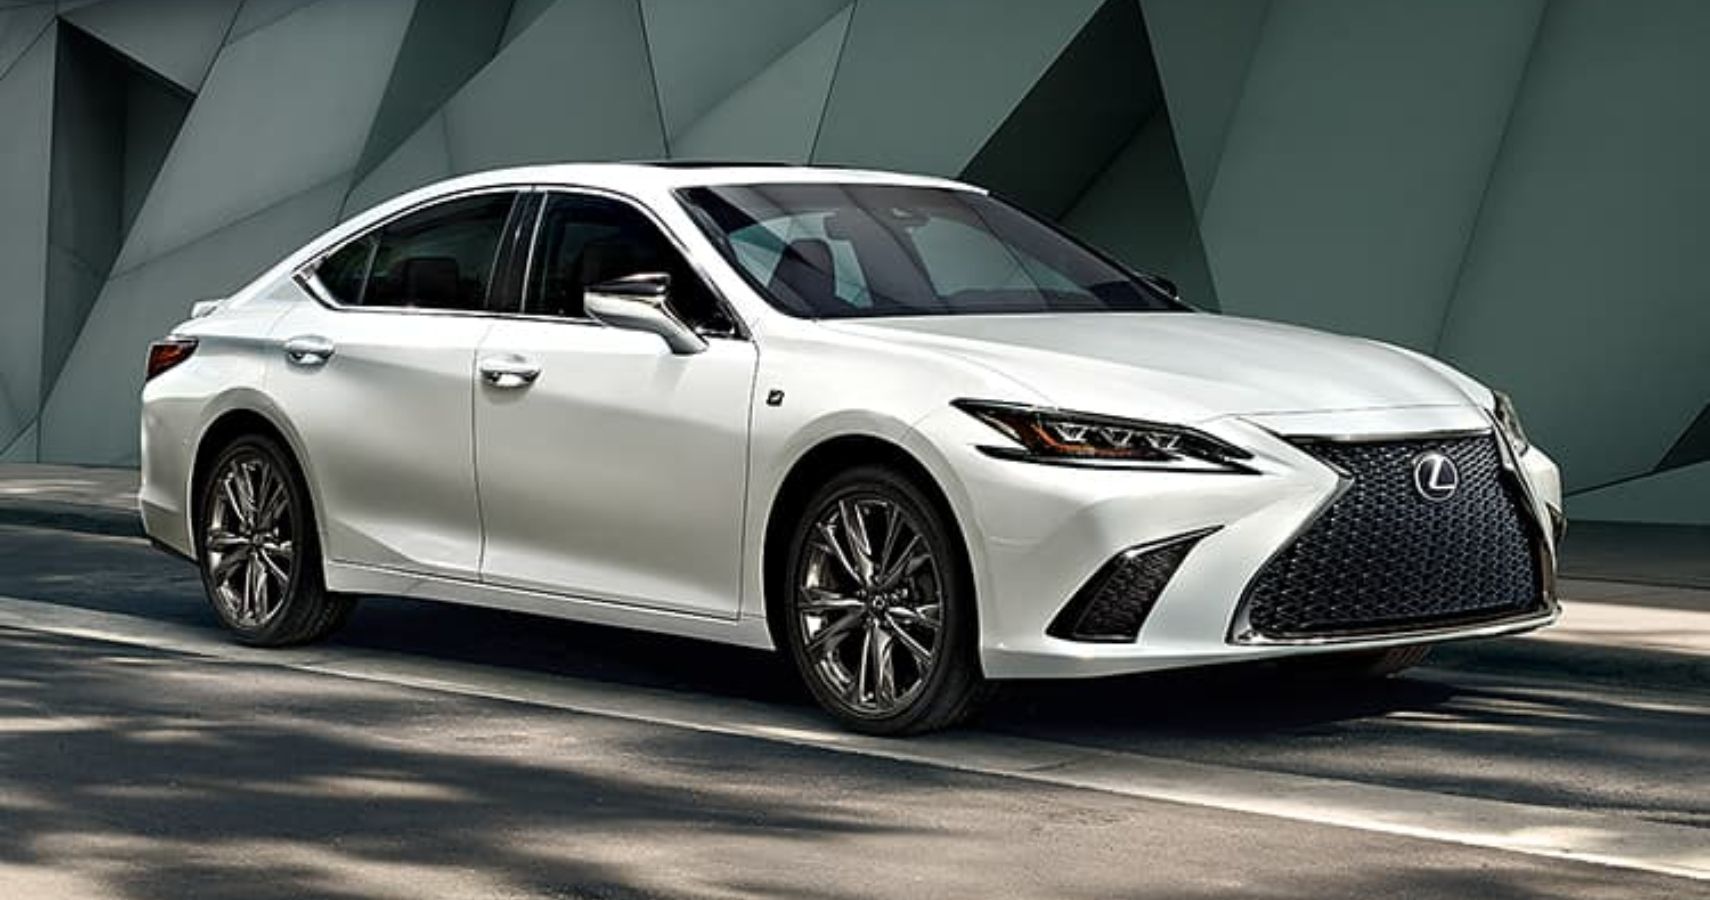 Lexus Customers Revealed To Be The Most Loyal Among Luxury Brand Buyers